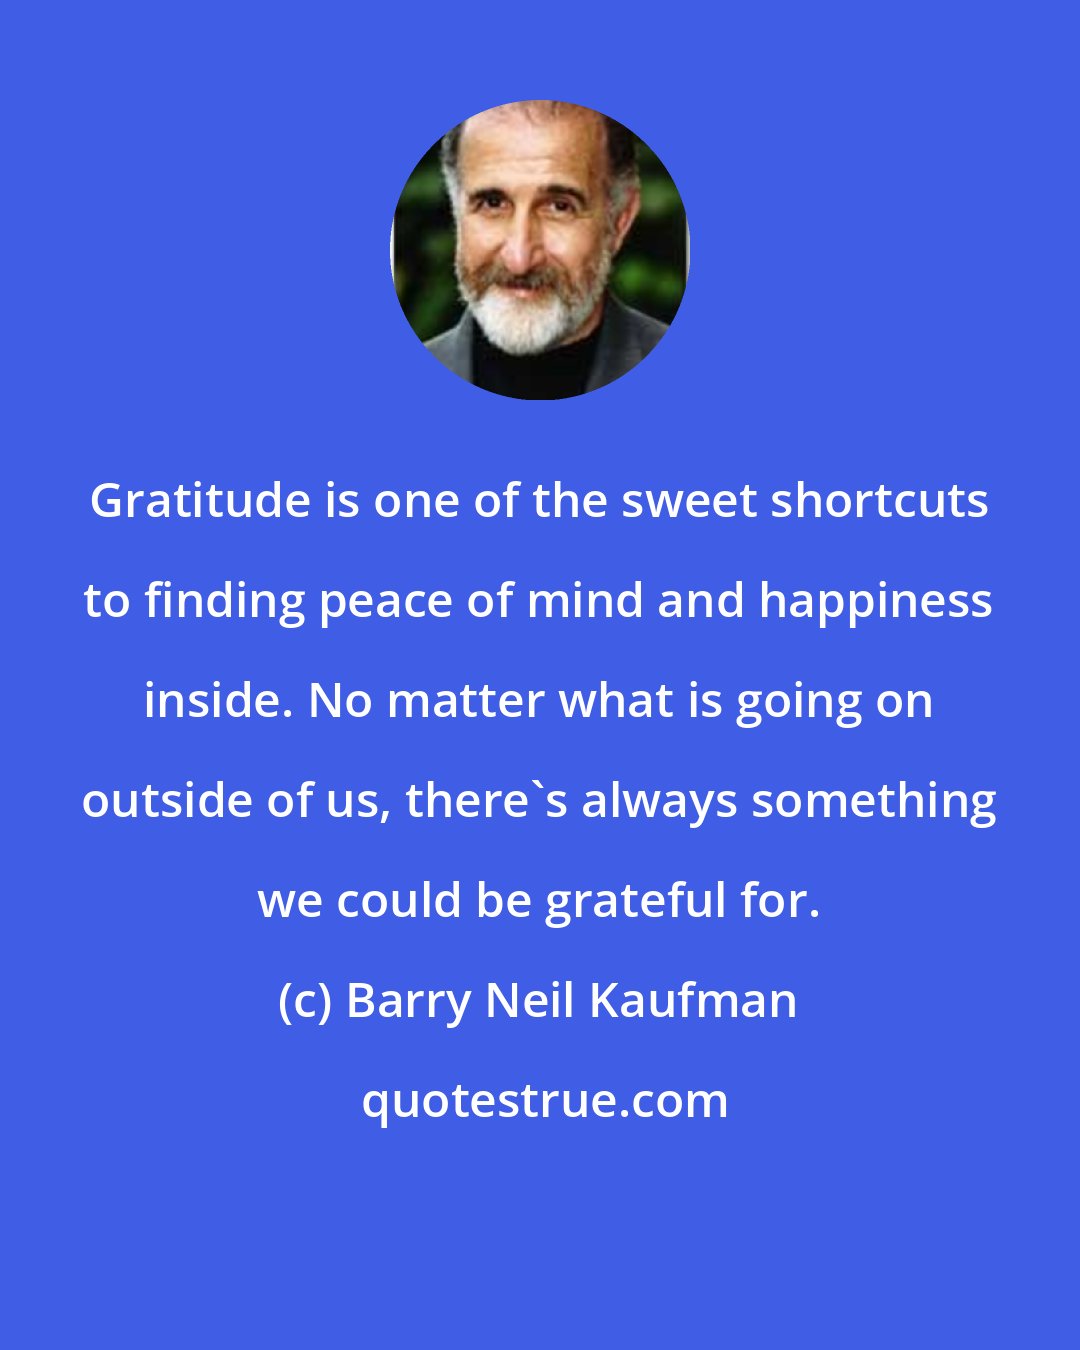 Barry Neil Kaufman: Gratitude is one of the sweet shortcuts to finding peace of mind and happiness inside. No matter what is going on outside of us, there's always something we could be grateful for.